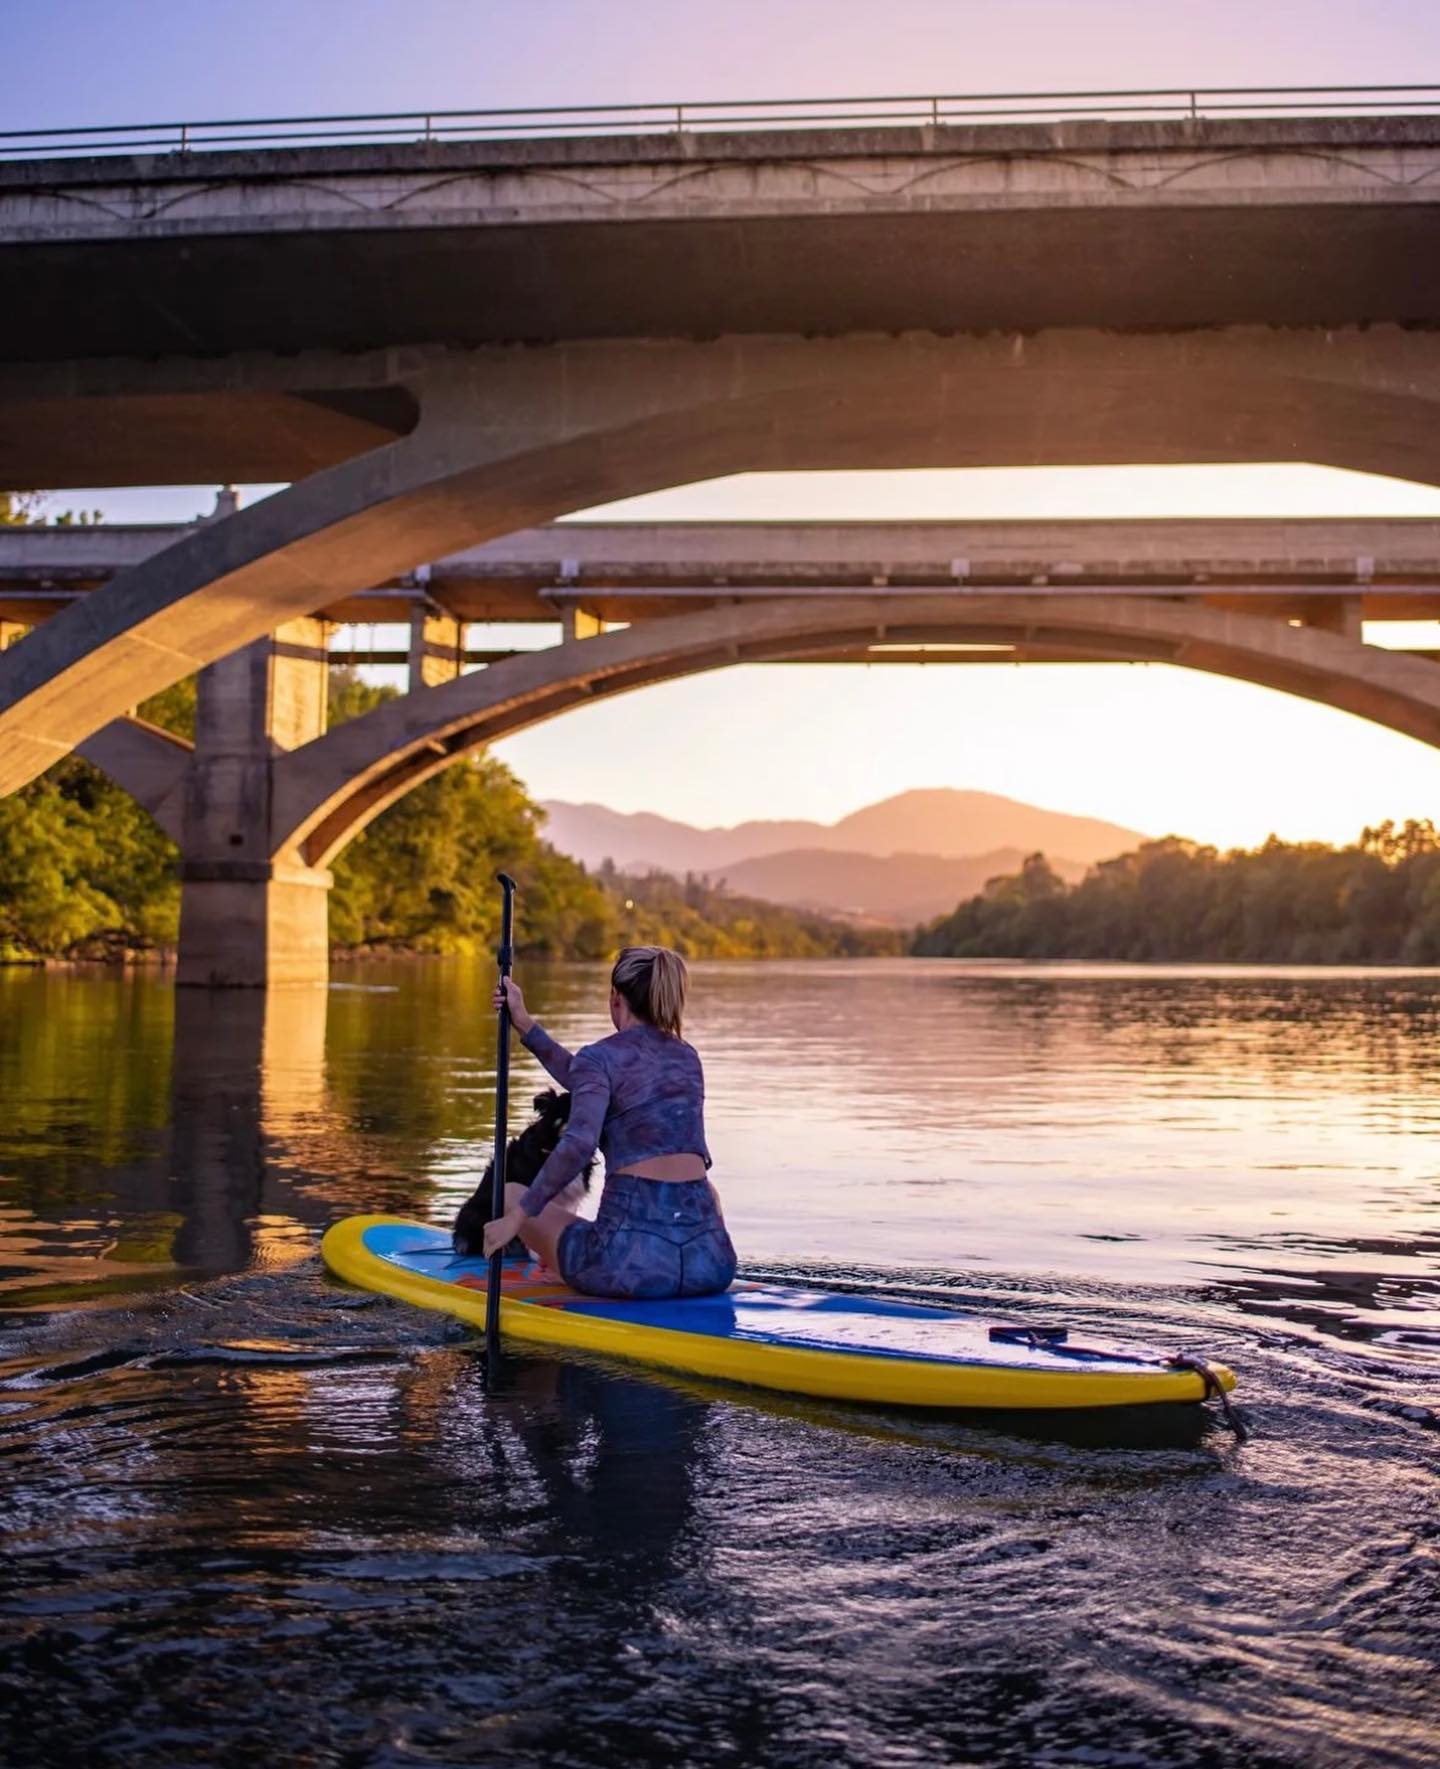 inflatable board is a stand up paddle board